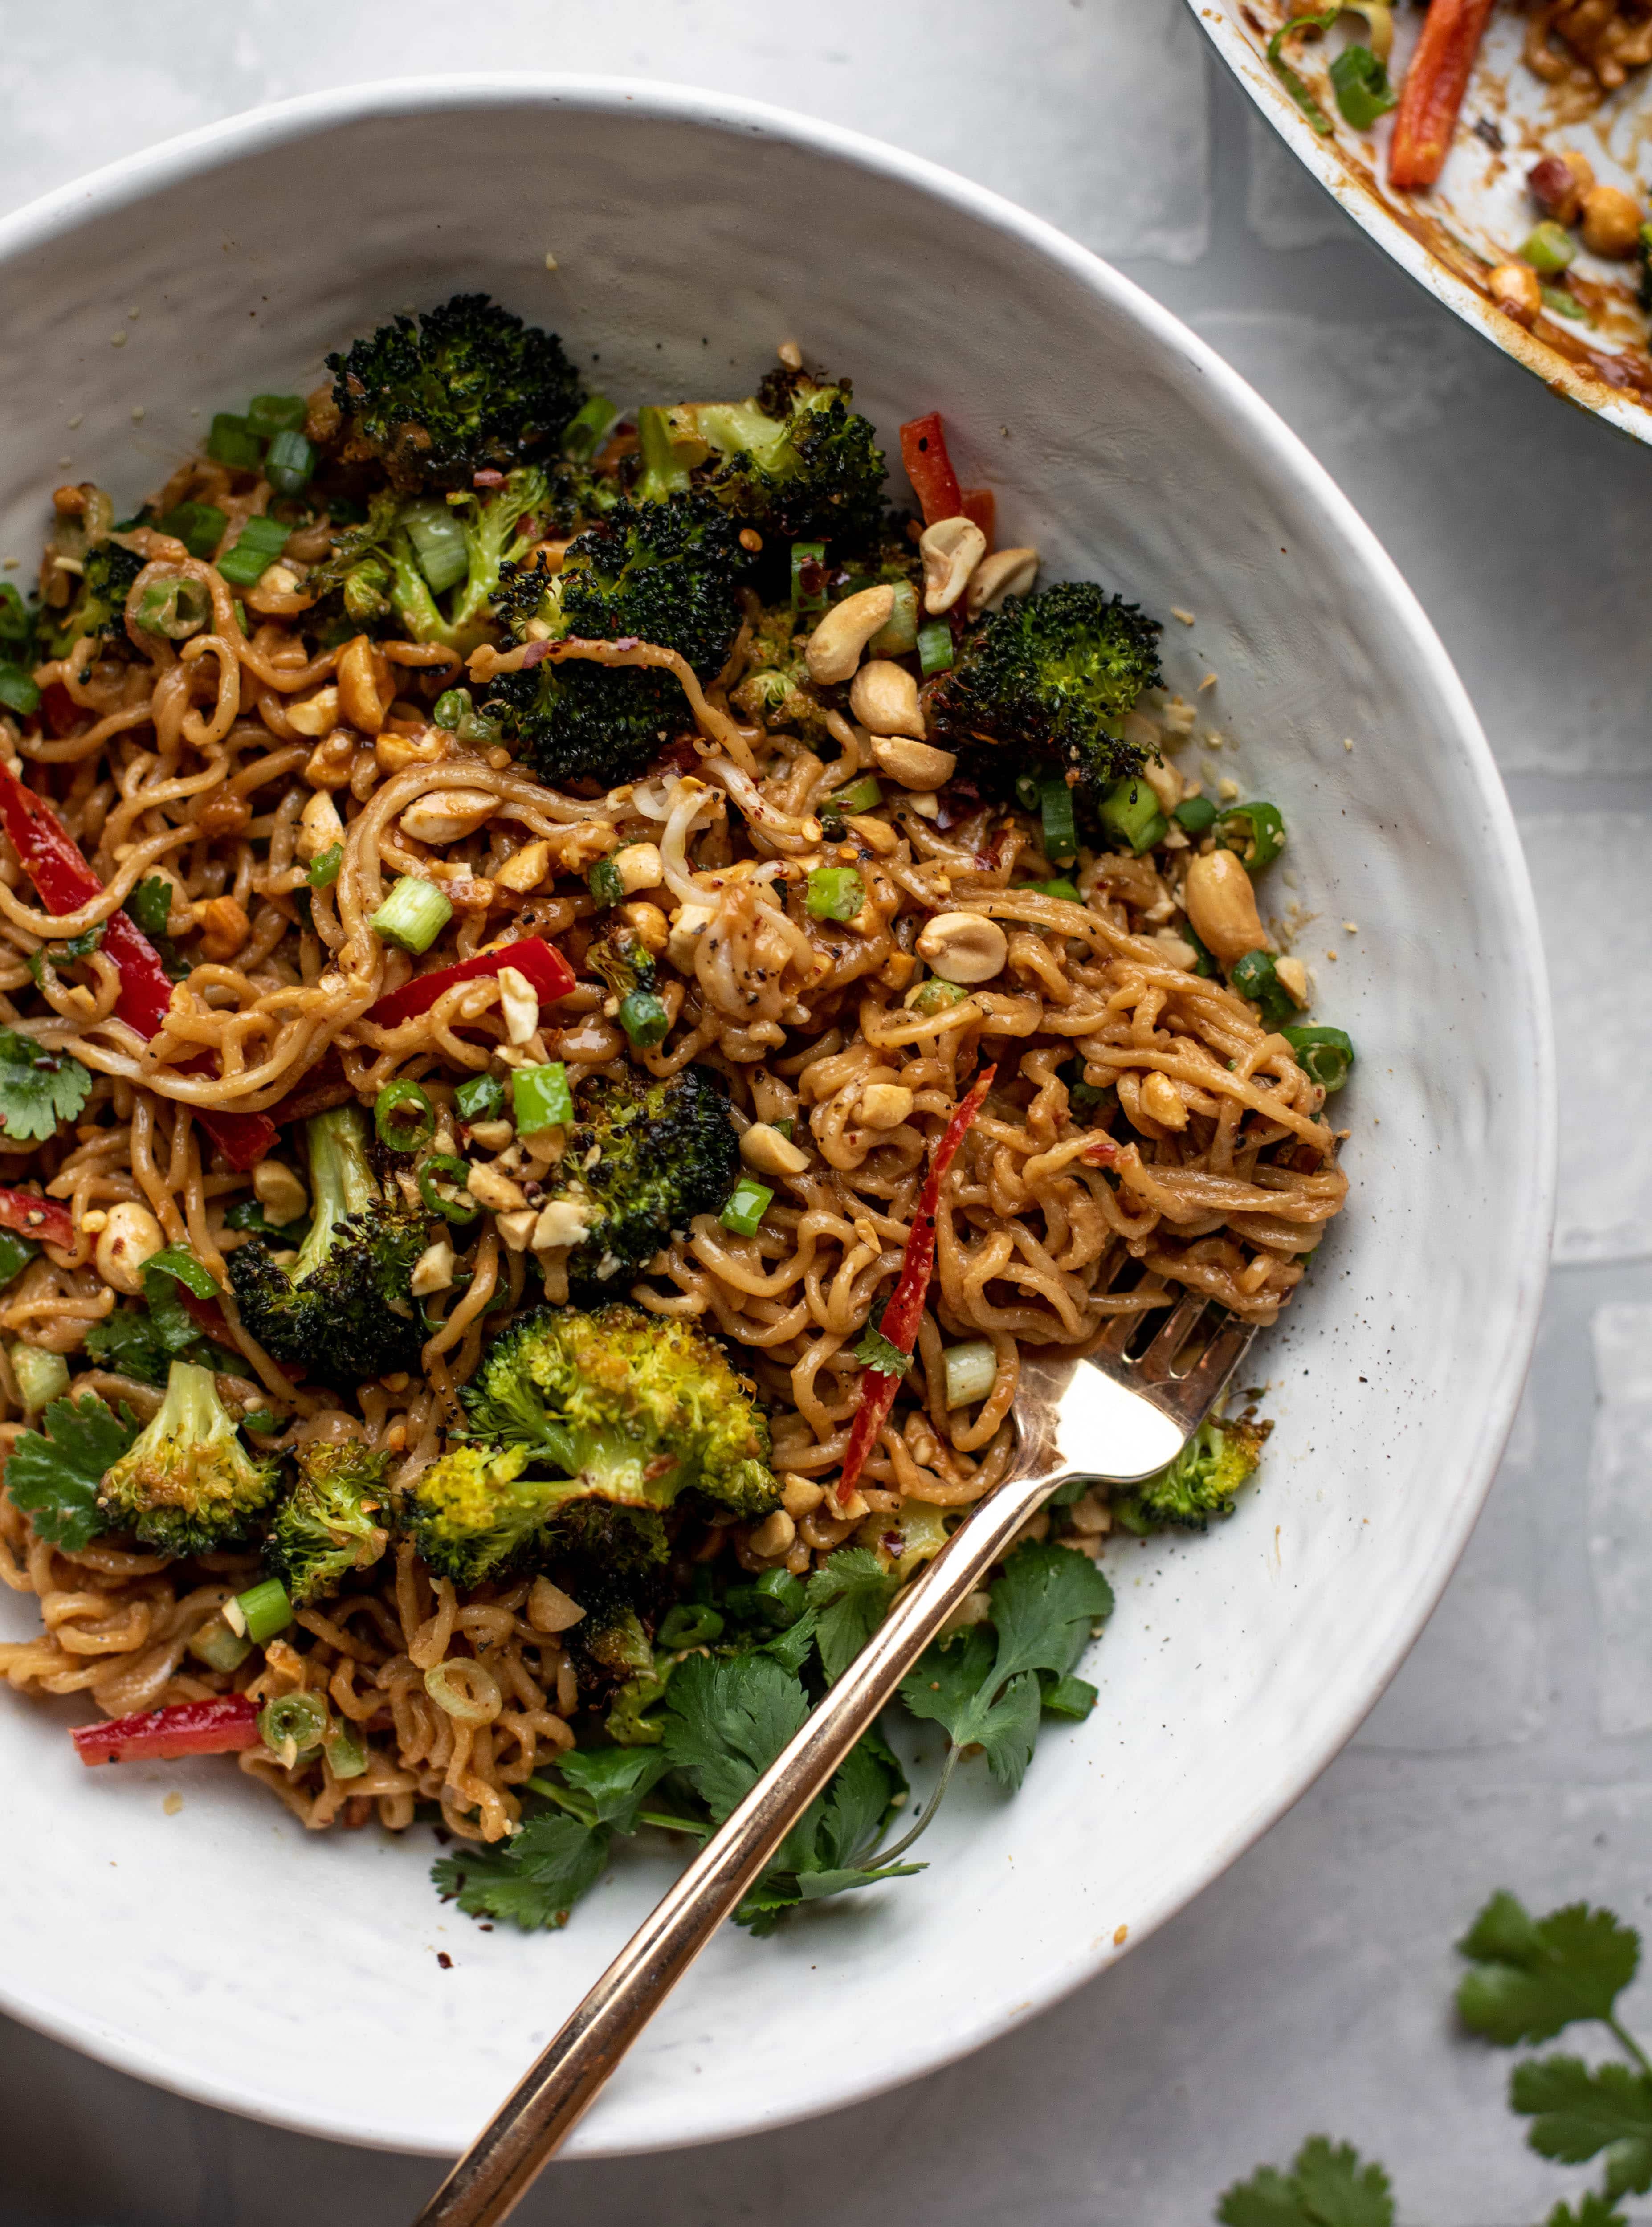 These are the most delicious peanut noodles! Tossed with roasted broccoli, red peppers, scallions, peanuts and an incredibly flavorful sauce!